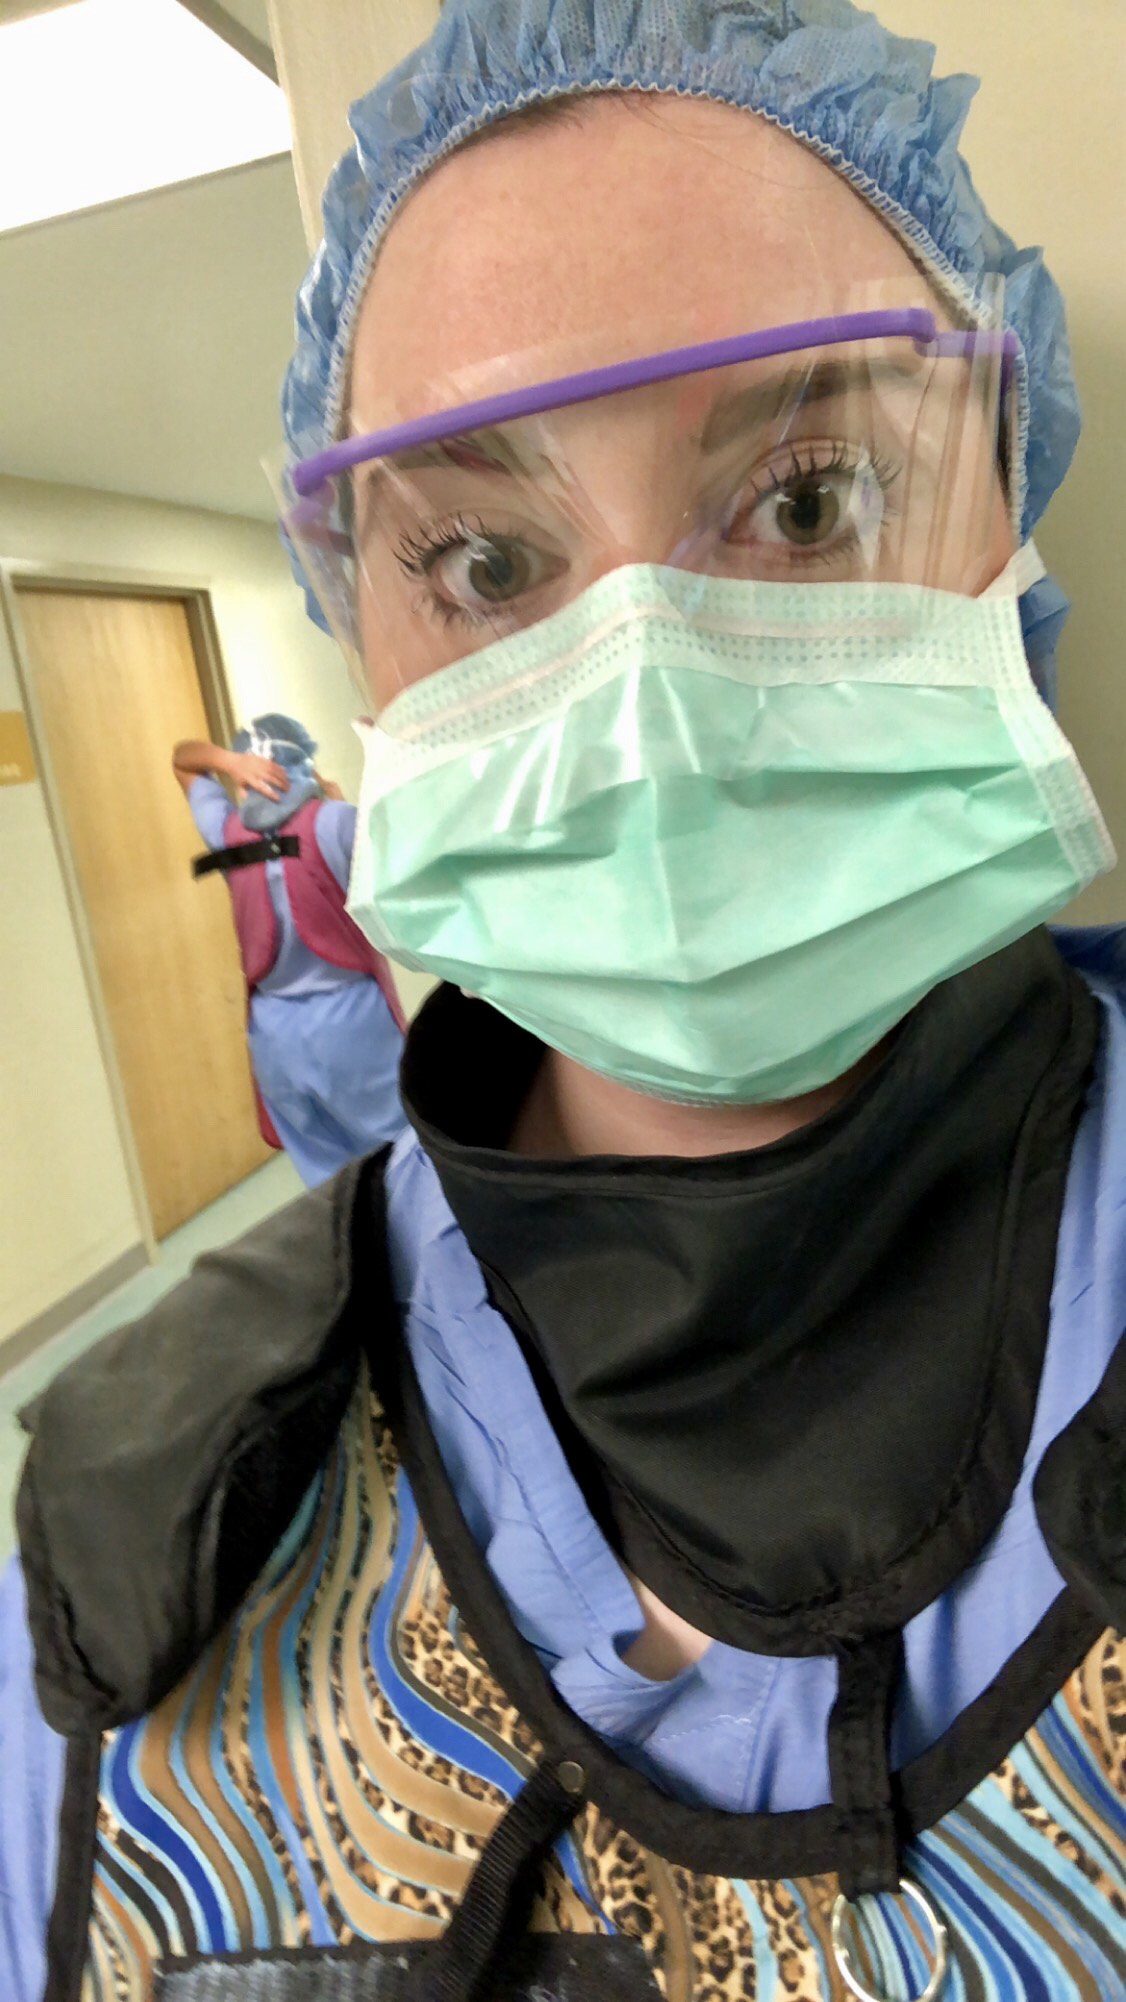 Selfie of a woman in scrubs and personal protective equipment in a hospital corridor.